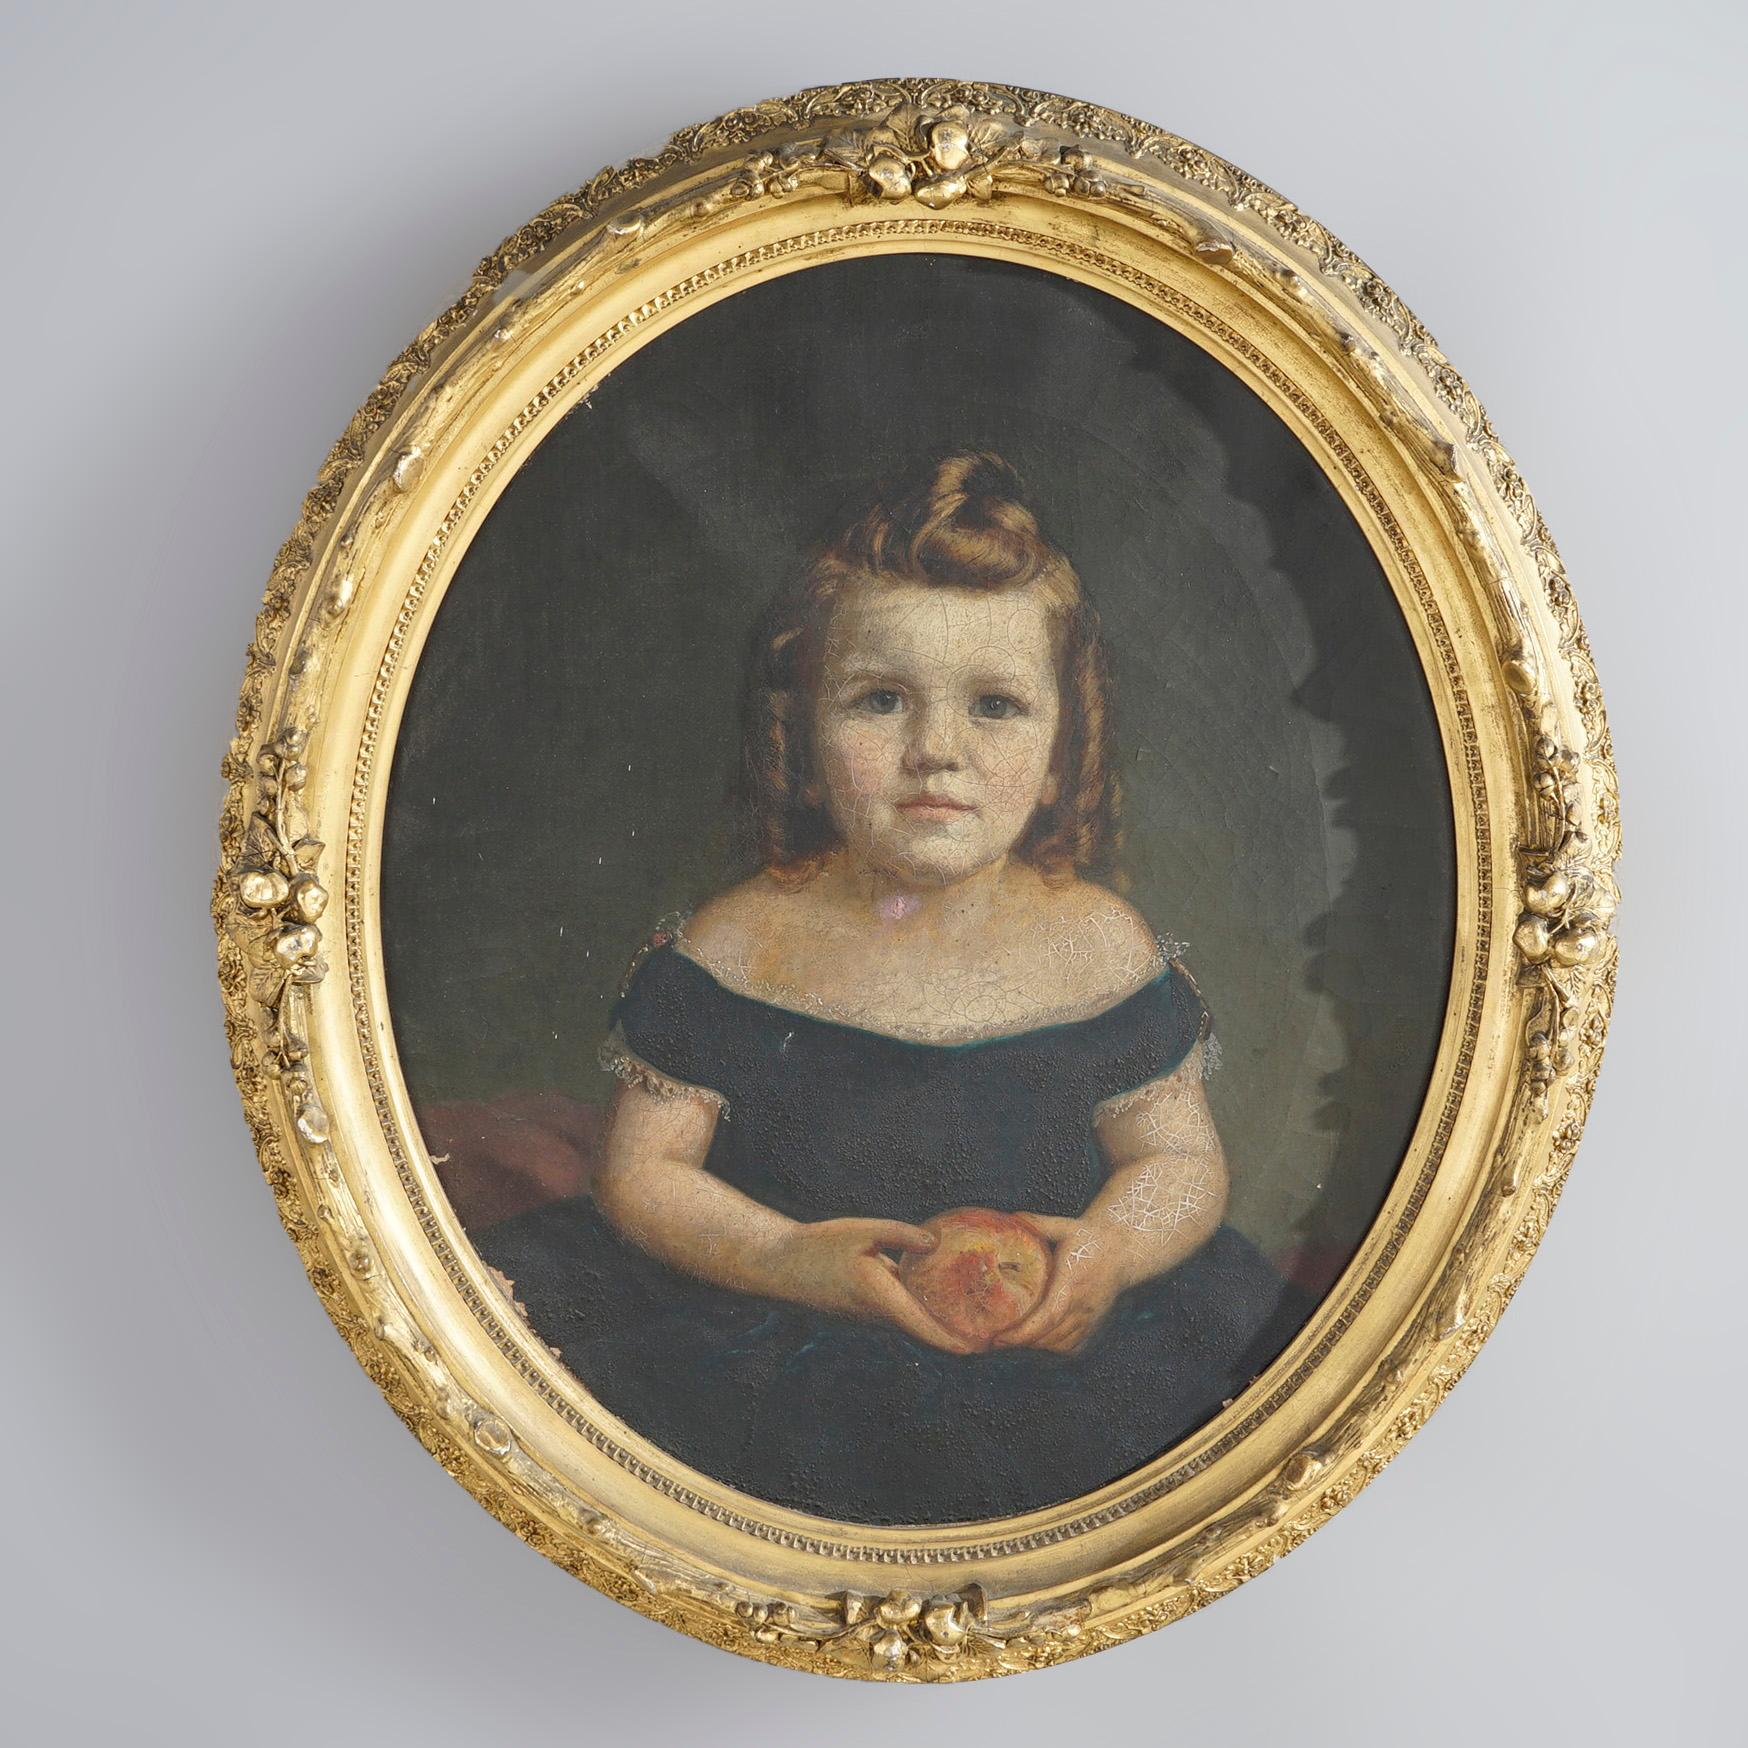 An antique painting offers oil on canvas portrait of a child holding a peach, seated in a giltwood frame, 19th century


Measures- overall 30.5''H x 25.25''W x 2.75''D; 20'' x 24'' sight.